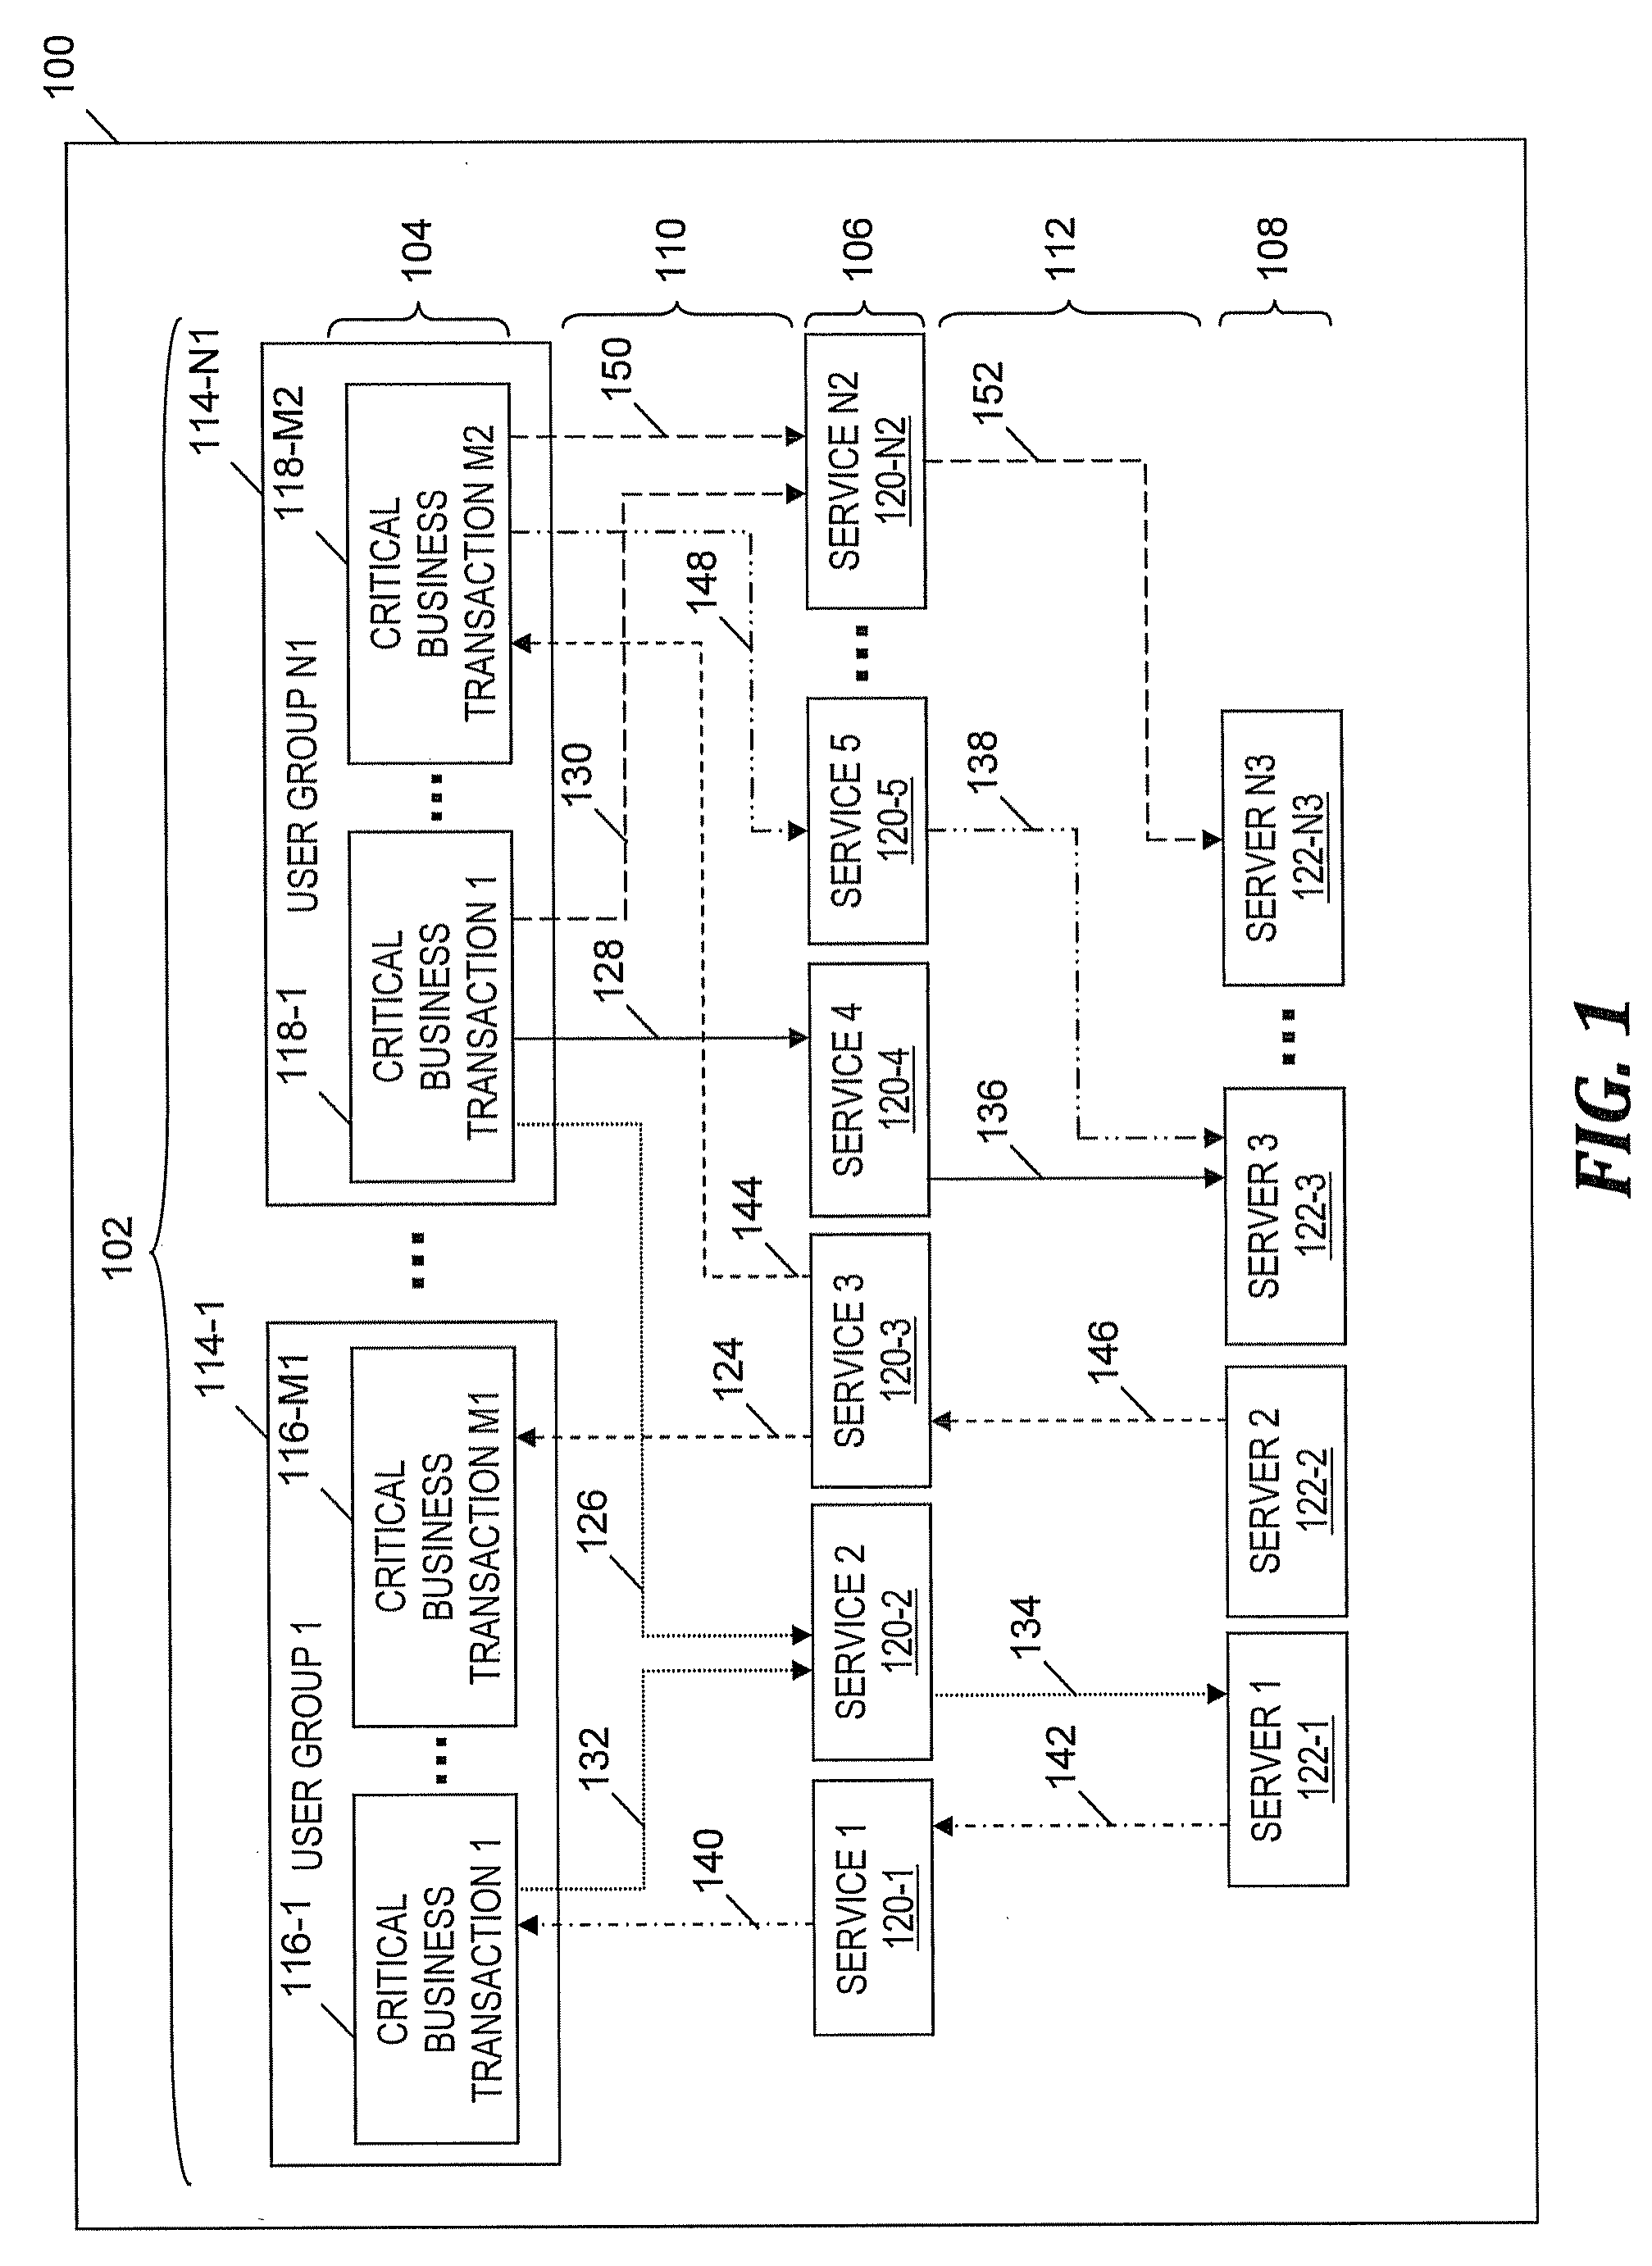 Generating and displaying an application flow diagram that maps business transactions for application performance engineering